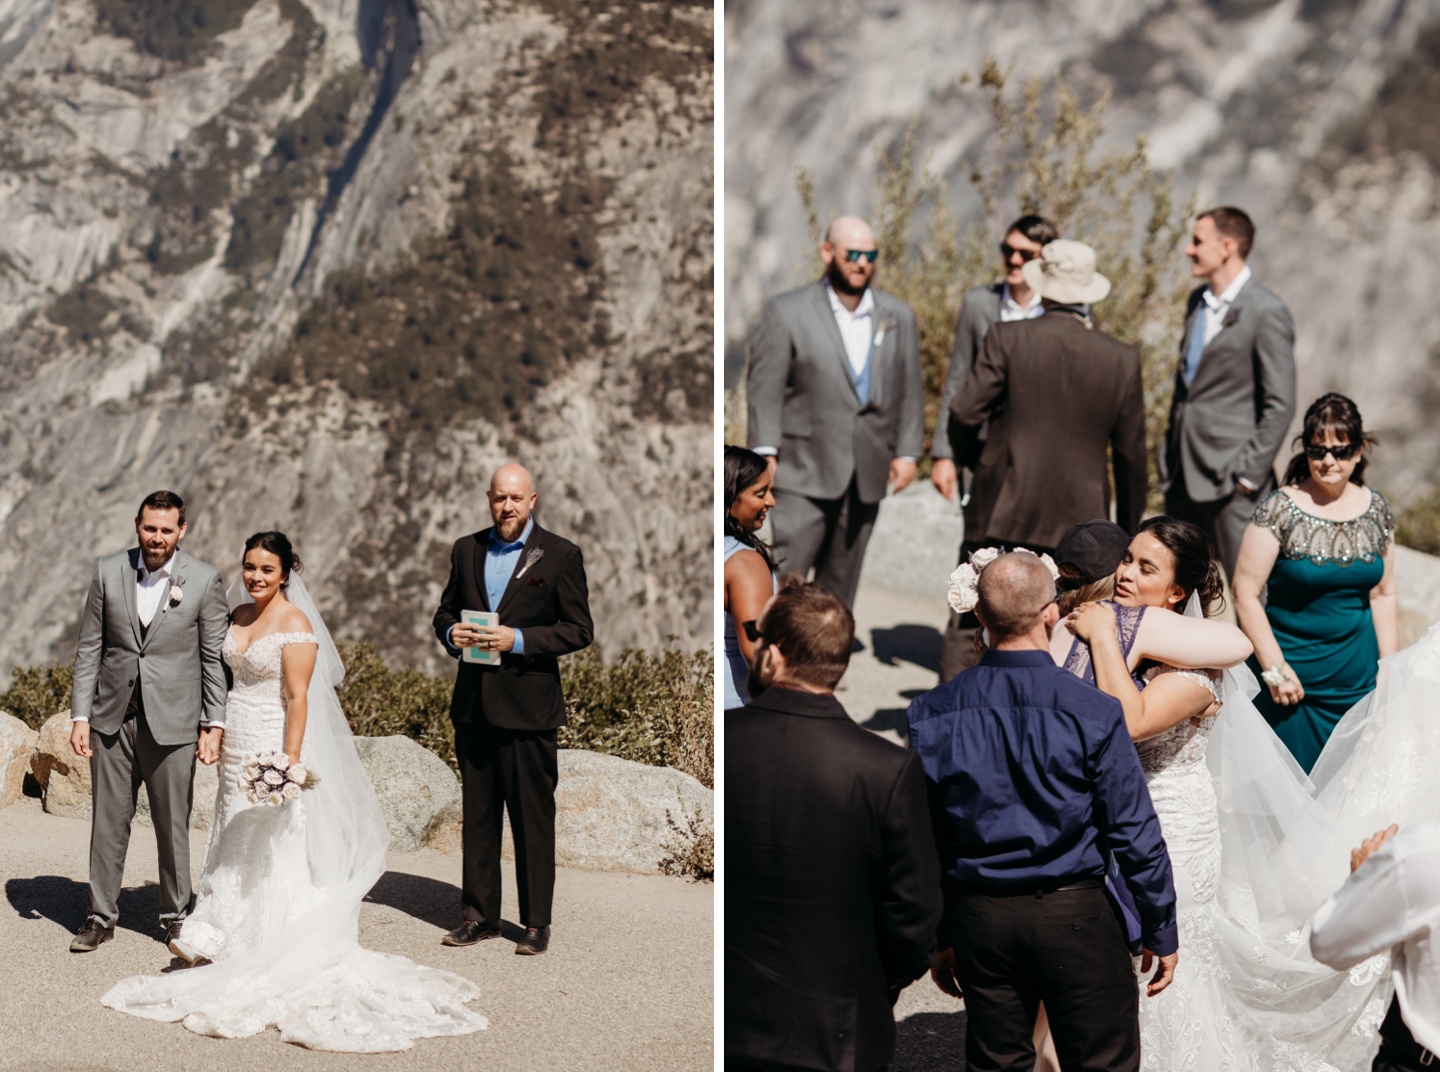 Bride and groom presented as husband and wife after they get married in Yosemite National Park